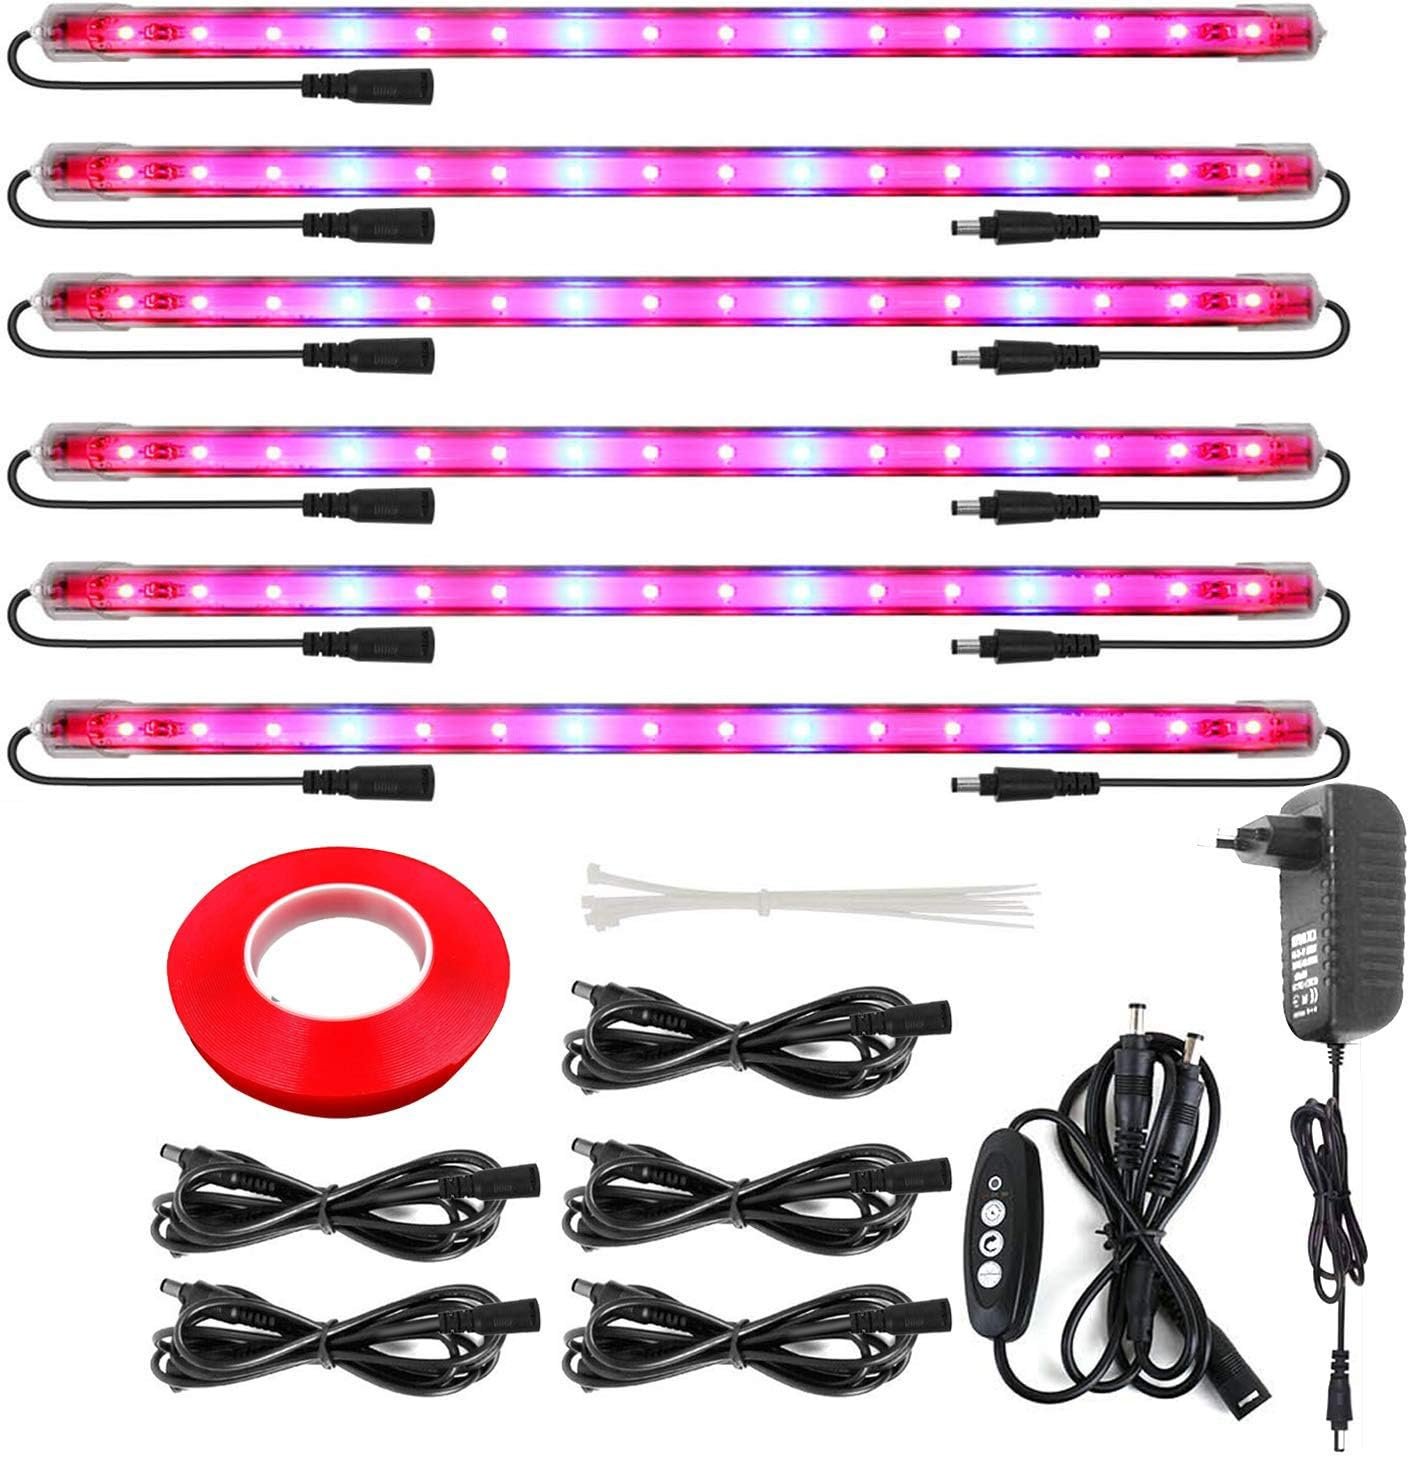 Roleadro Led Grow Light Strips for Indoor Plants, Full Spectrum Auto On  Off T5 Grow Lamp with Timer/Extension Cables Plant Lights Bar 4 Dimmable Levels